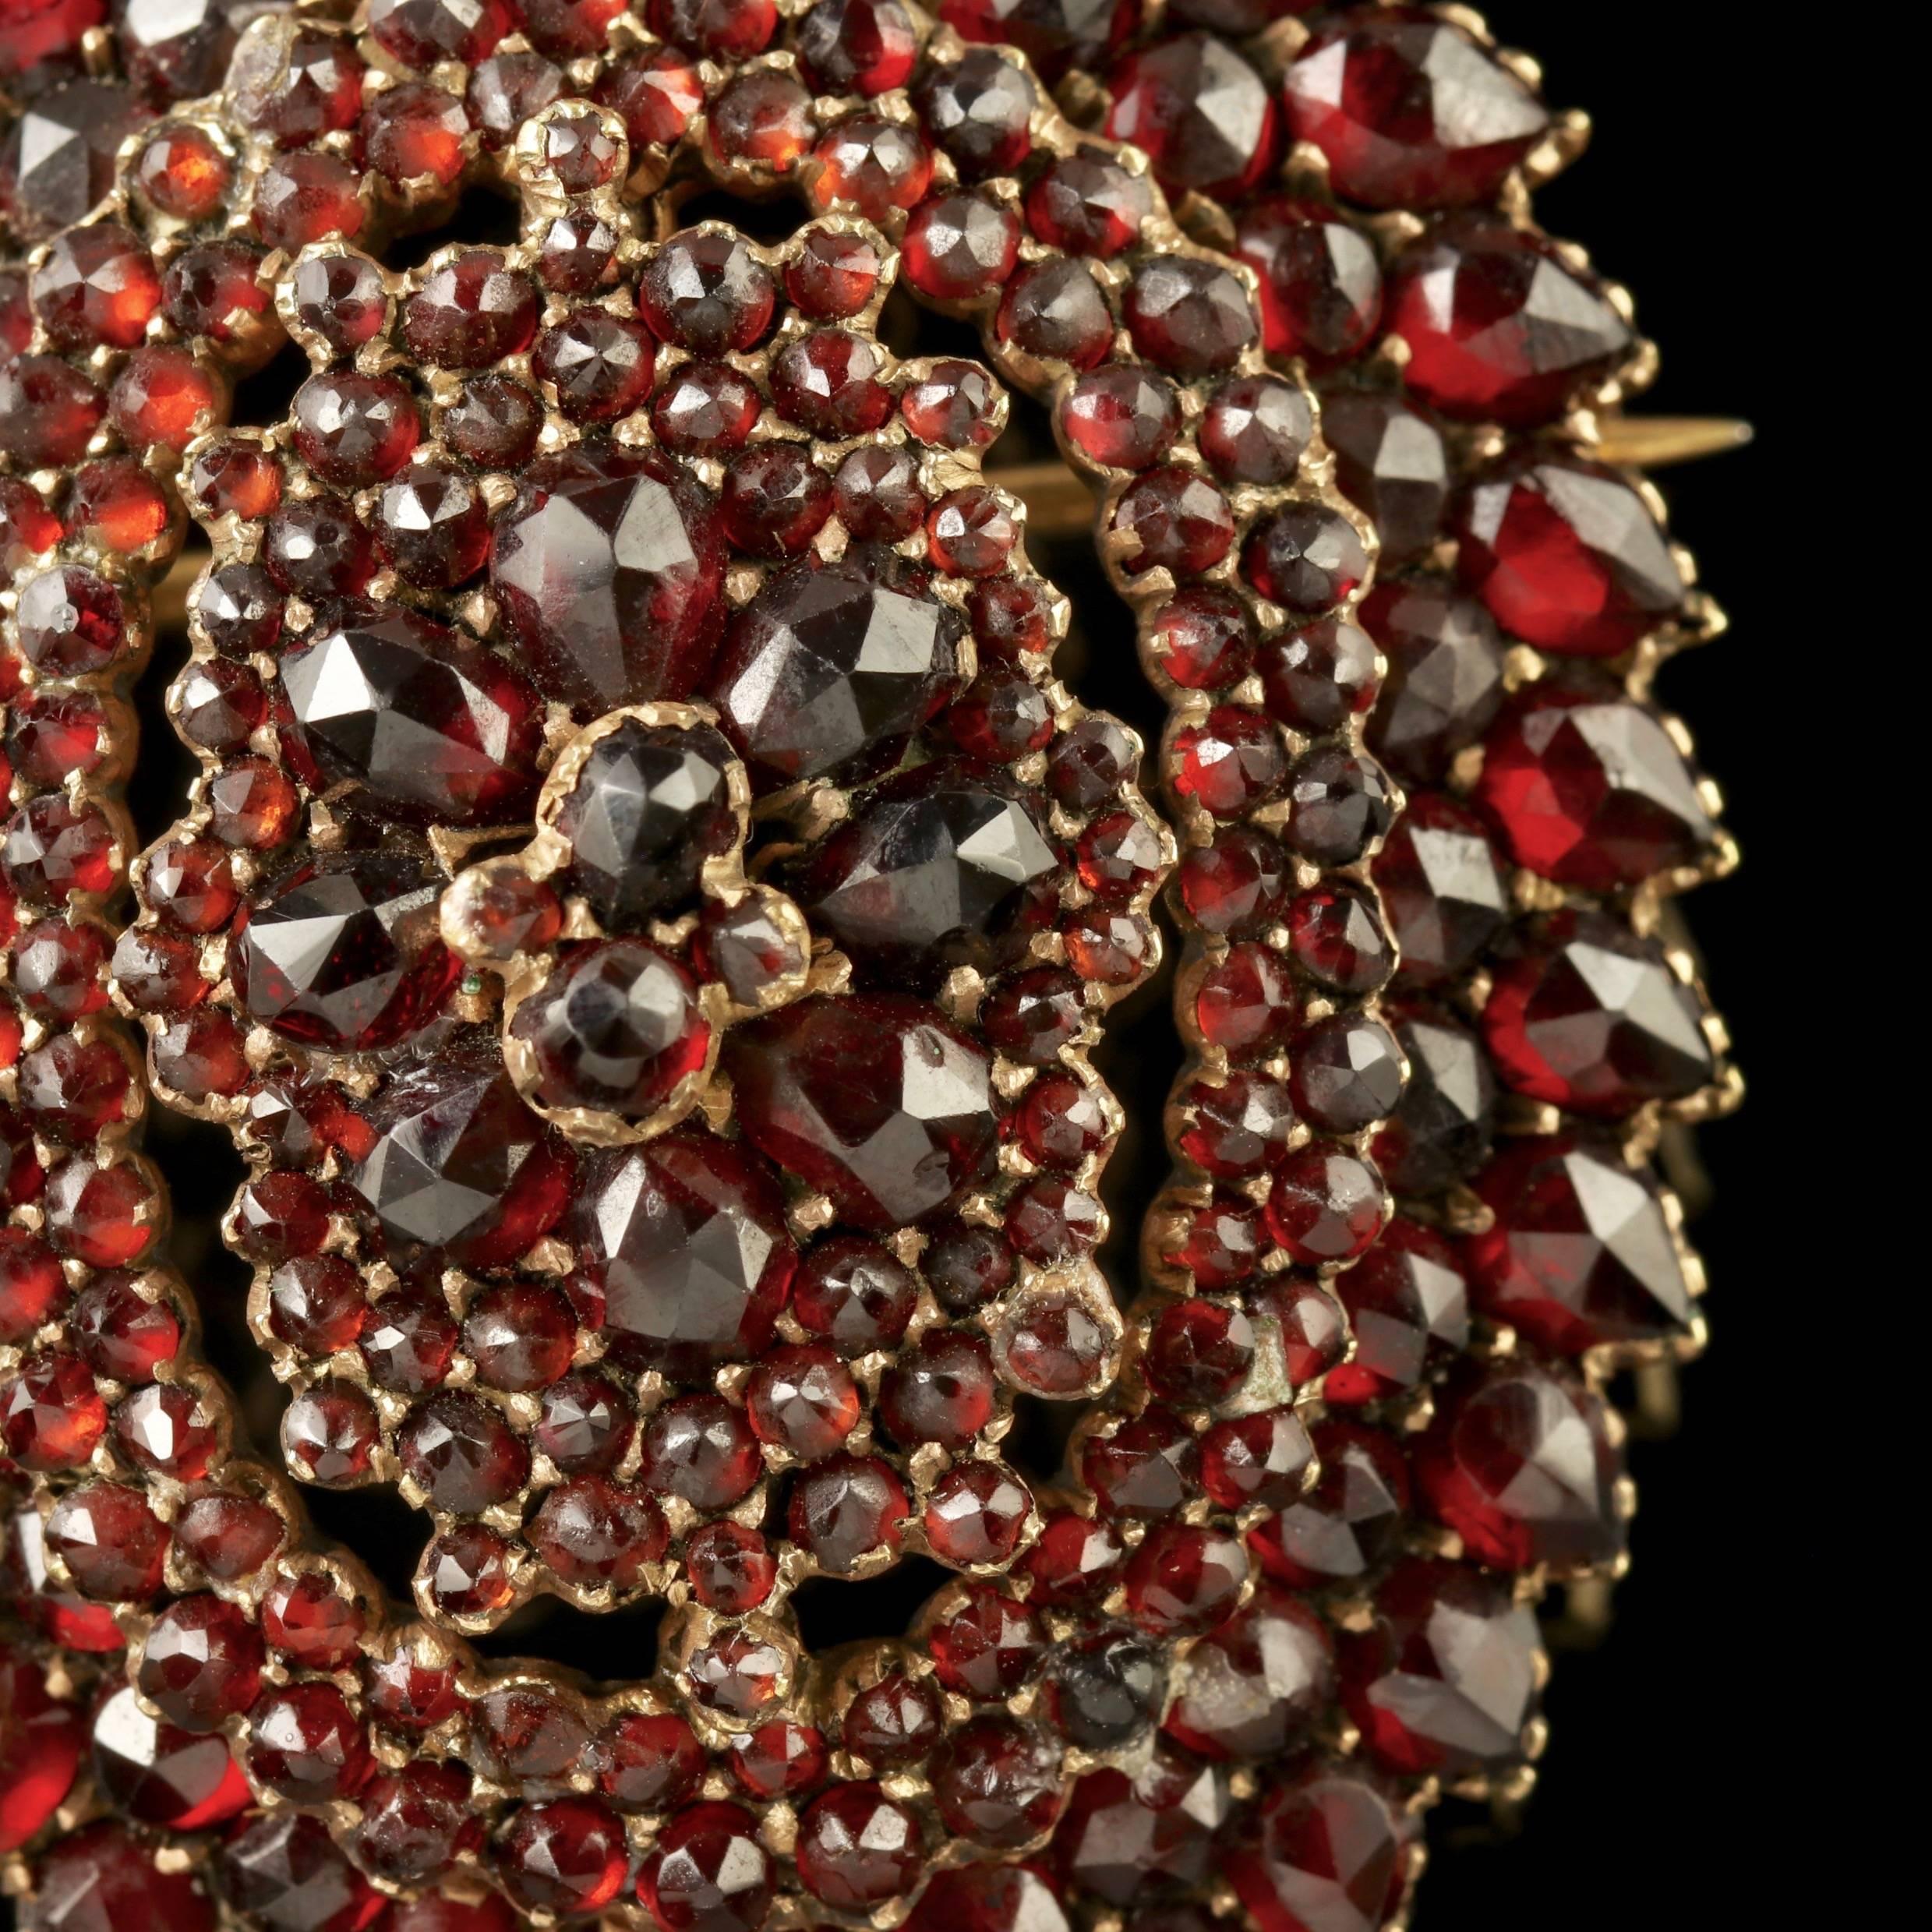 To read more please click continue reading below-

This beautiful antique Victorian Bohemian Garnet Gold locket brooch is Circa 1880. 

The fabulous locket is adorned with clusters of deep red Bohemian Garnet’s set in a beautifully designed